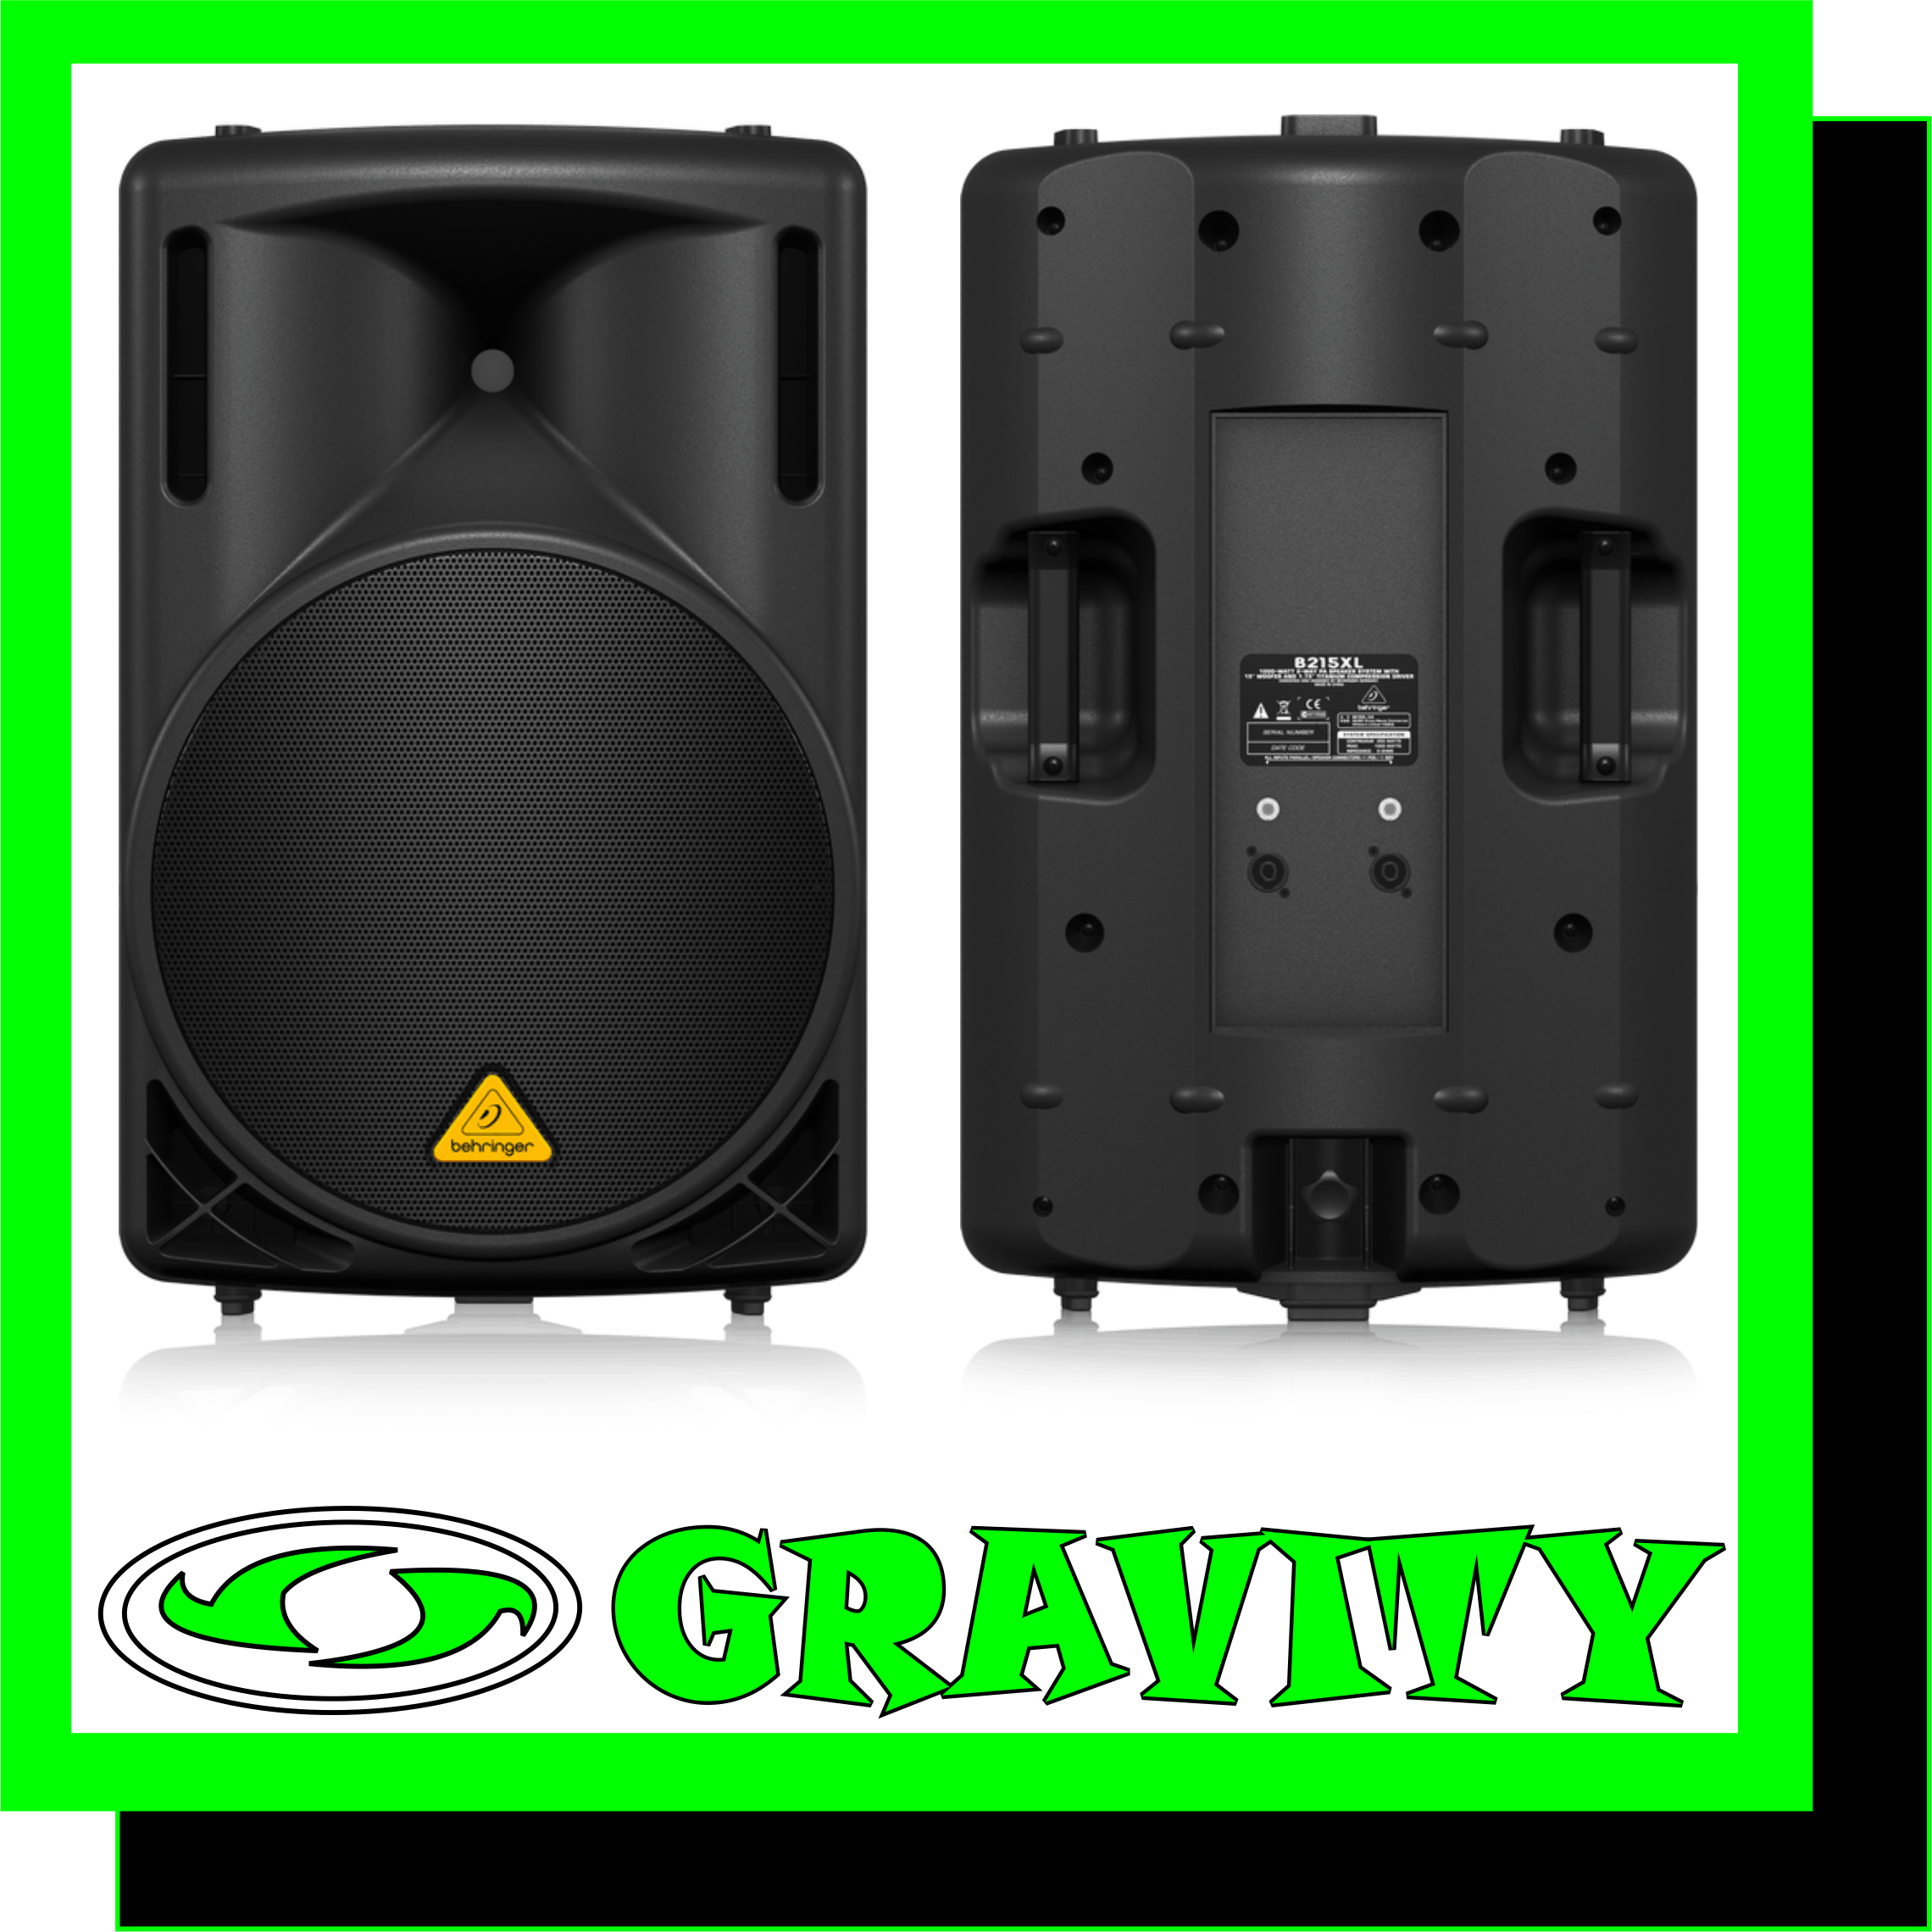 EUROLIVE B215XL 1000-Watt 2-Way PA Speaker System with 15" Woofer and 1.75" Titanium Compression Driver  -High-power 2-way PA sound reinforcement speaker system for live and playback applications (250 Watts Continuous / 1000 Watts Peak Power) -Ultra-compact and light weight system delivers excellent sound even at extreme sound pressure levels -Extremely powerful 15'' long-excursion driver provides incredibly deep bass and acoustic power -State-of-the-art 1.75'' titanium-diaphragm compression driver for exceptional high-frequency reproduction -Ultra-wide dispersion, large-format exponential horn -Overload-protection circuitry ensures optimal HF driver protection -Versatile trapezoidal enclosure design allows different positioning:  - Stand mounting with 35-mm pole socket  - Tilts on its side for use as a floor monitor -Ergonomically shaped handles for easy carrying and setup -2 professional speaker connectors plus ¼'' jack connectors